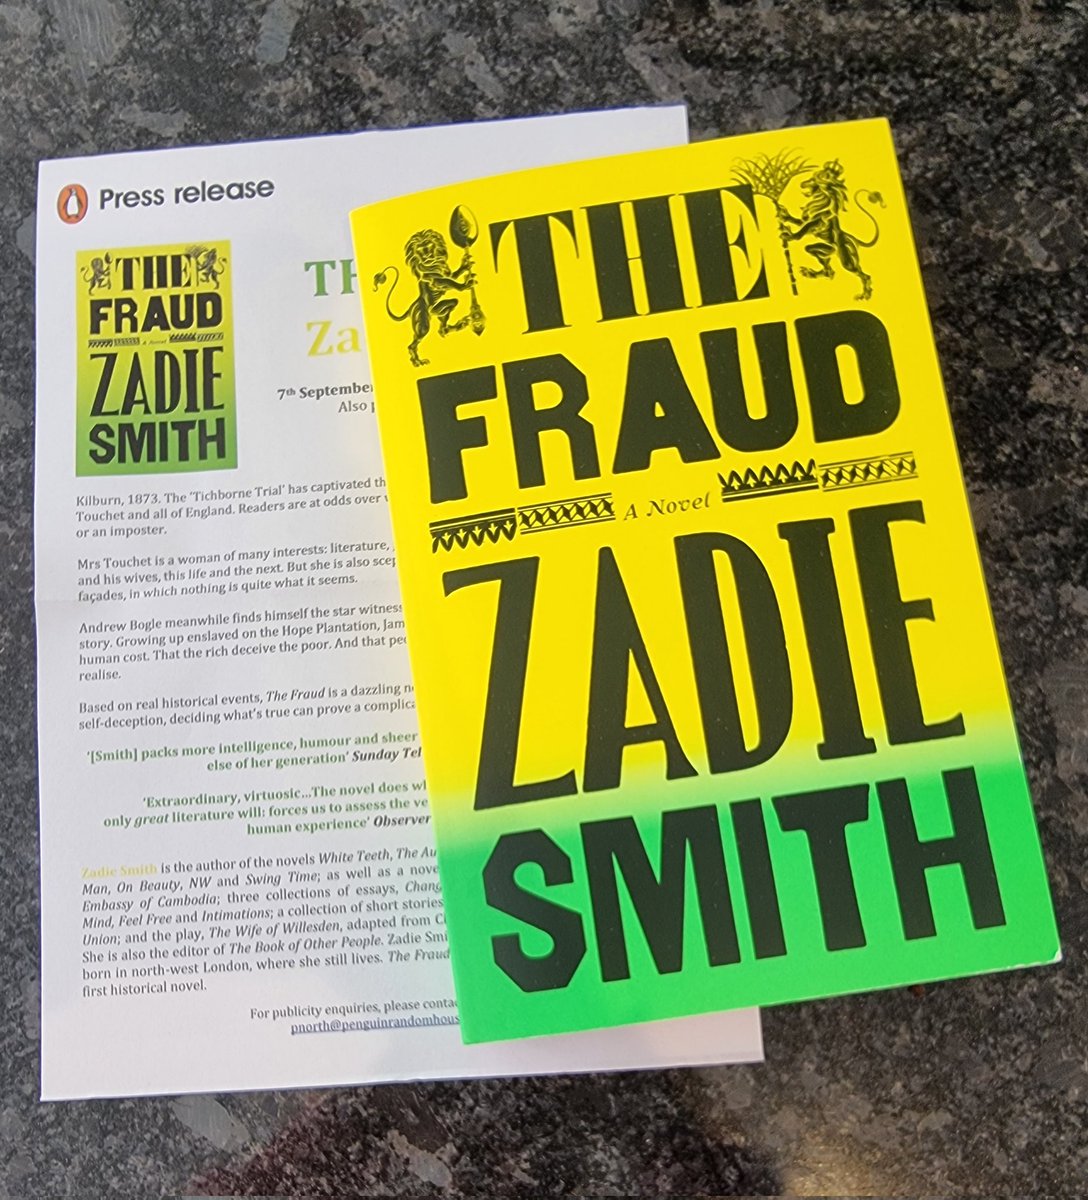 So excited to receive this gorgeous proof of #TheFraud @ZadieSmith 
Published 7th September 
Thank you so much @PenguinUKBooks 
#books #BookTwitter #bookbloggers